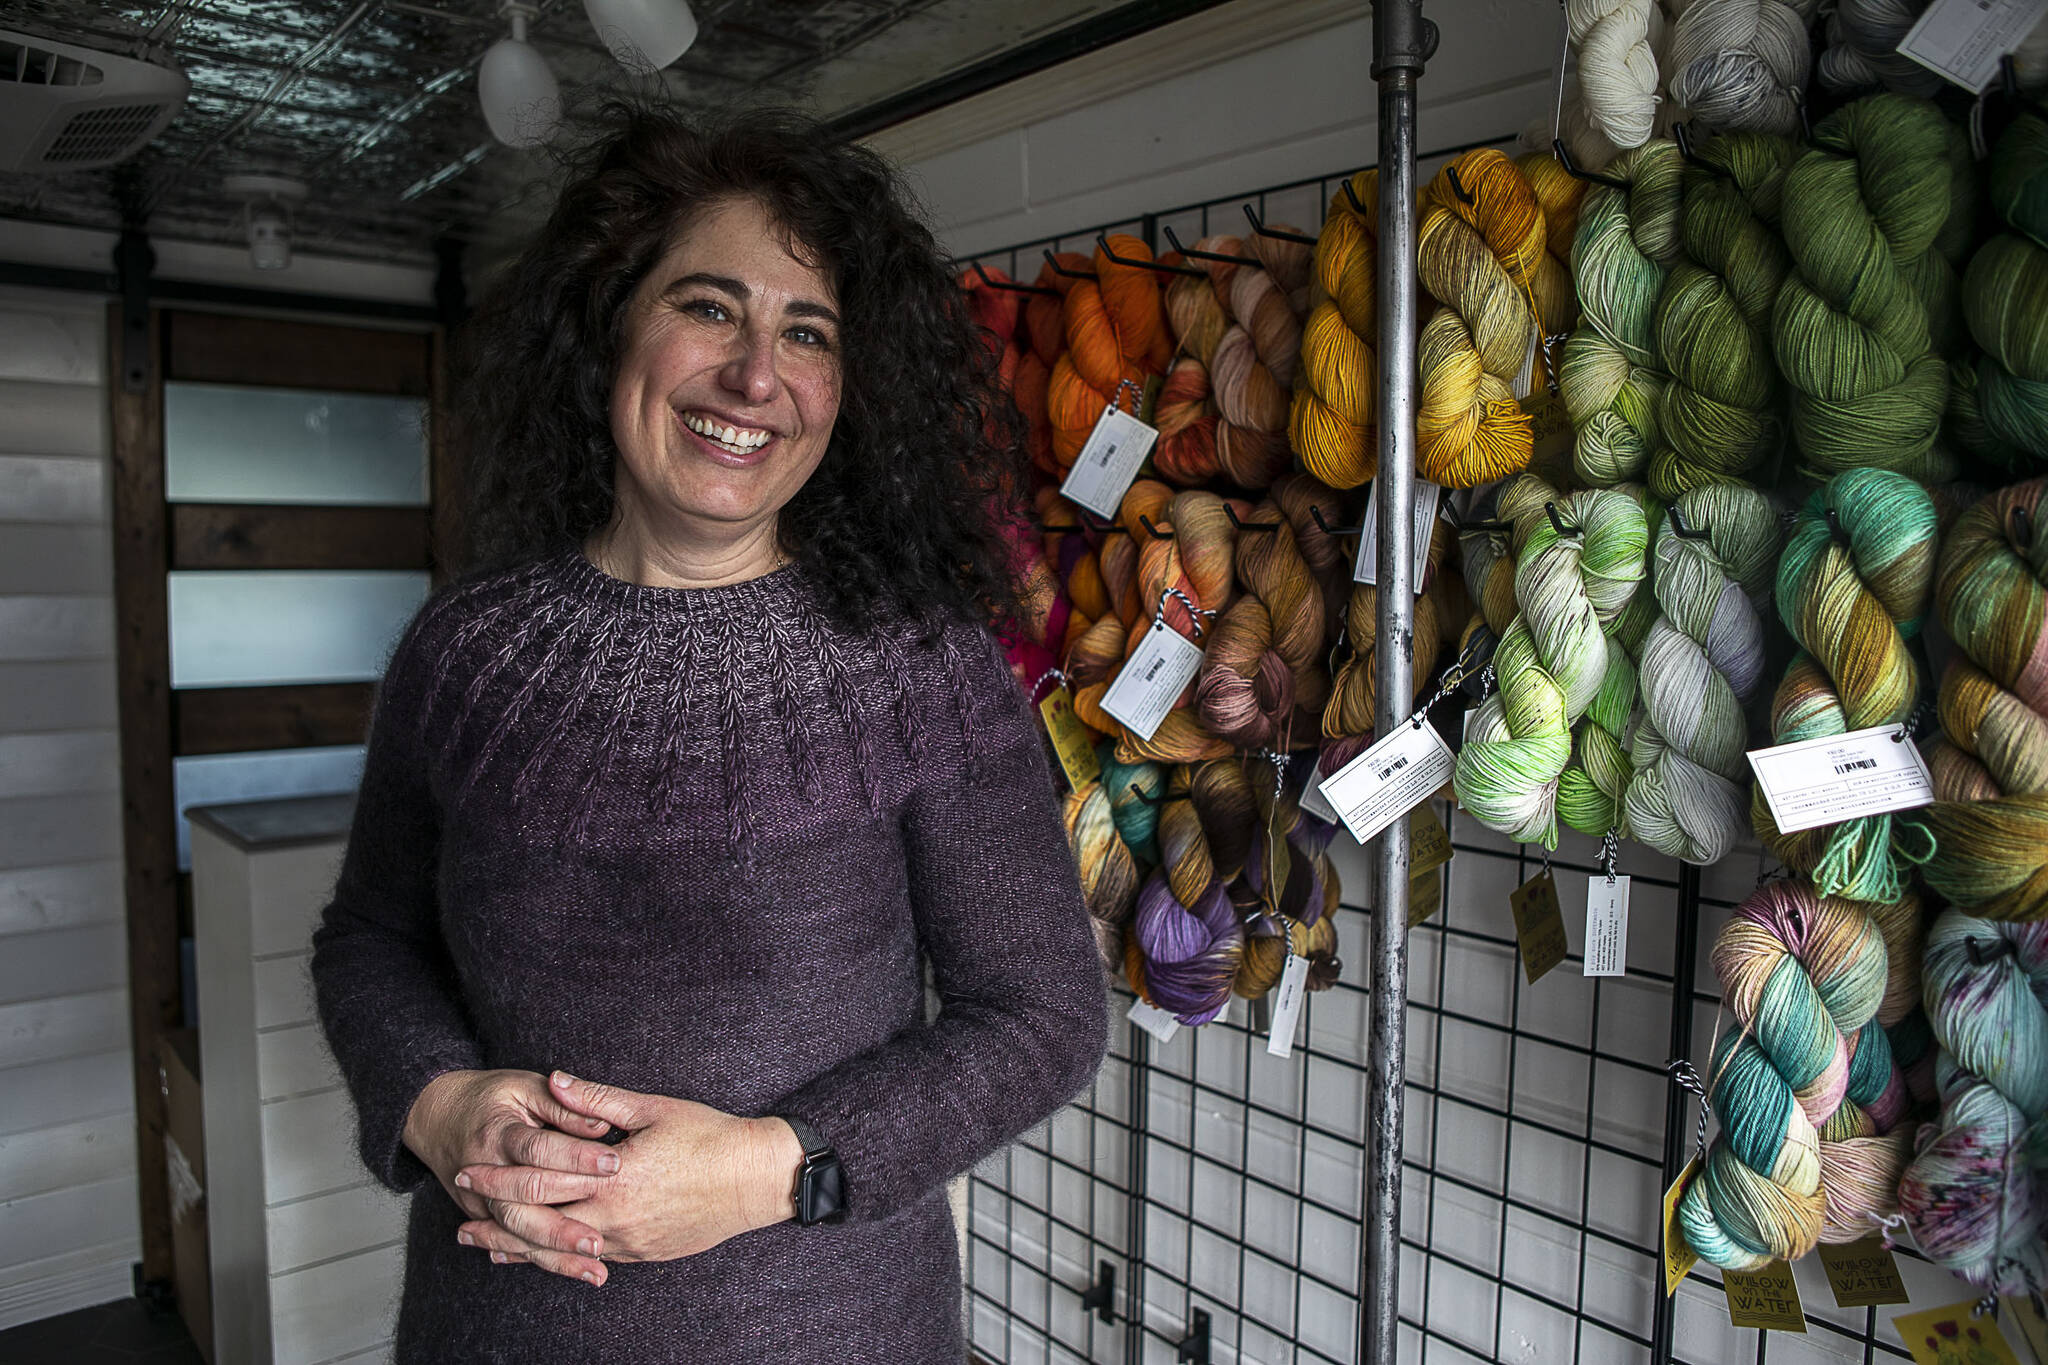 Willow Mietus, 50, stands inside “The Wool Wagon.” (Annie Barker / The Herald)